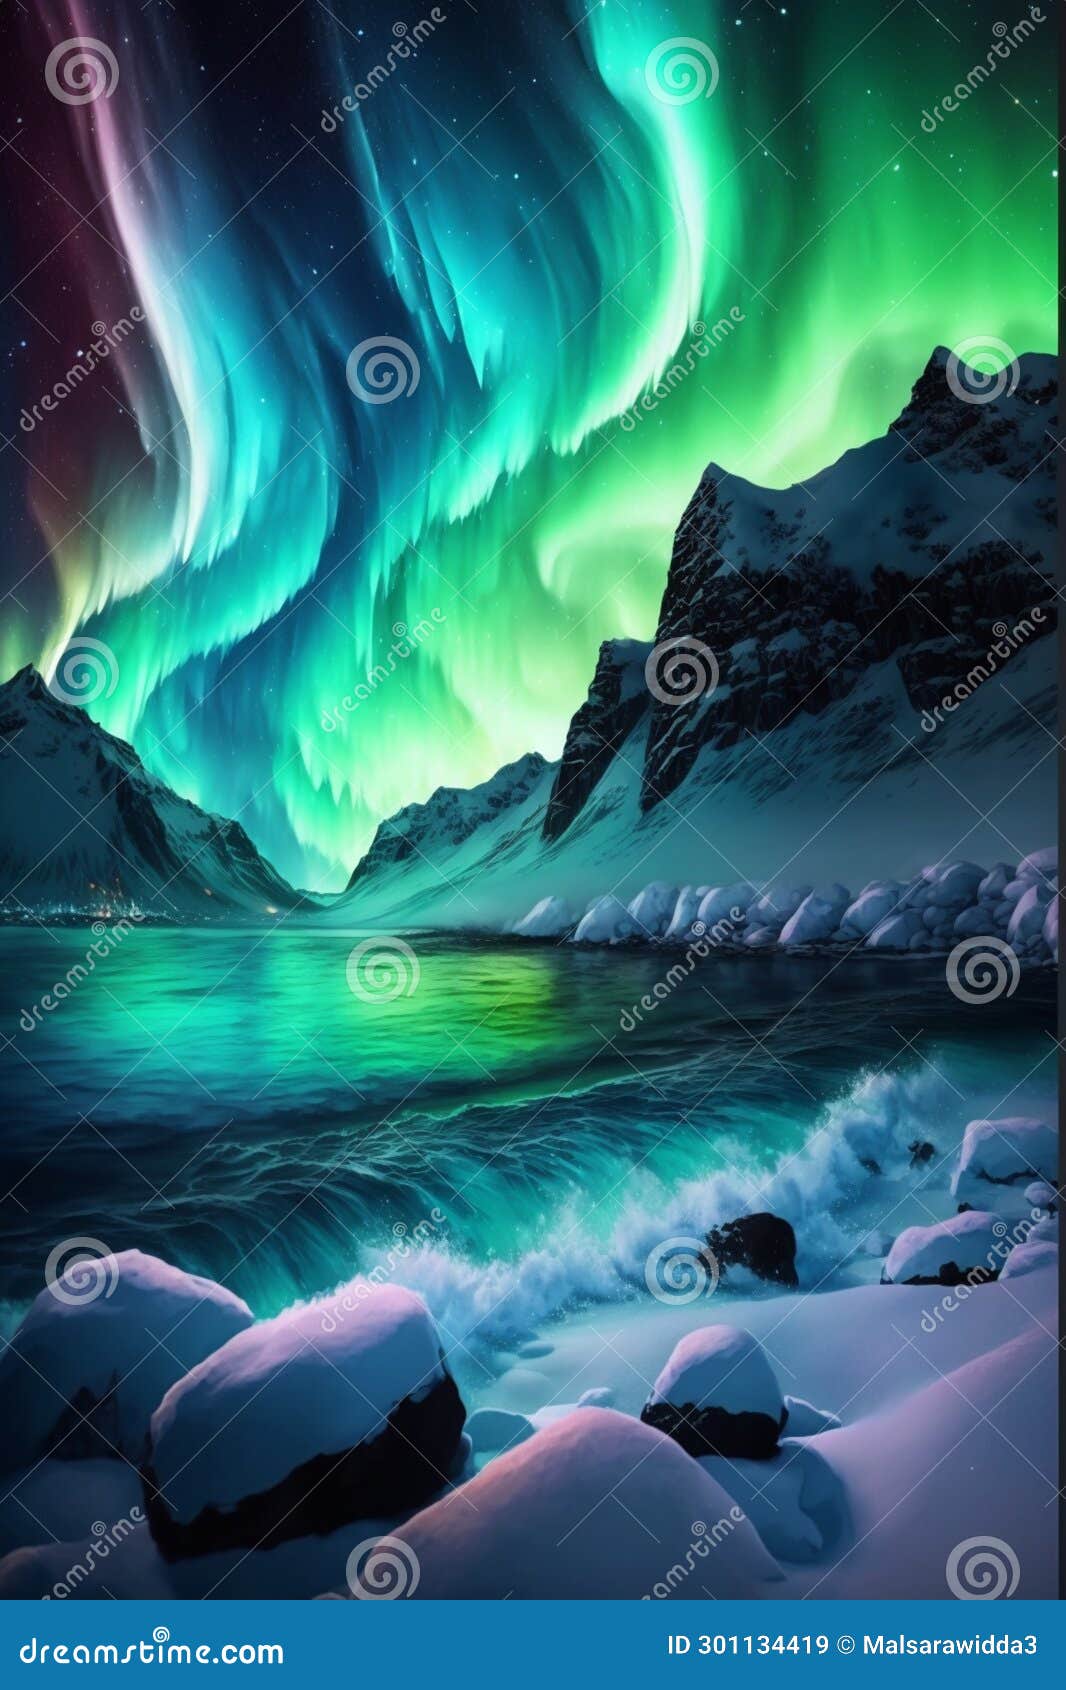 Northern lights/Aurora Borealis by ExsqueezeMe